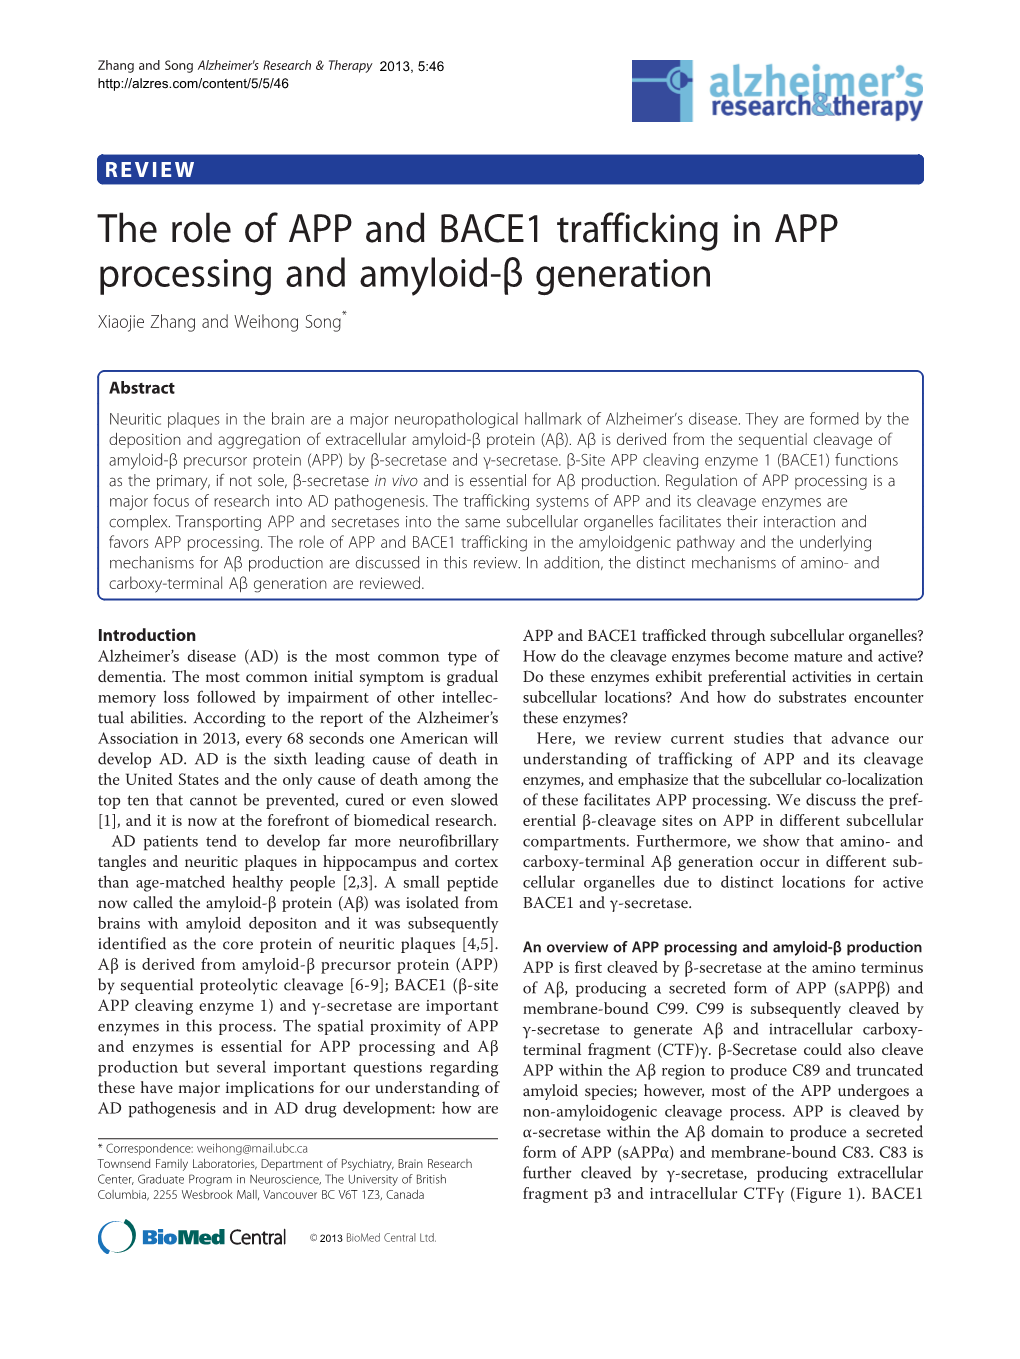 The Role of APP and BACE1 Trafficking in APP Processing and Amyloid-Β Generation Xiaojie Zhang and Weihong Song*